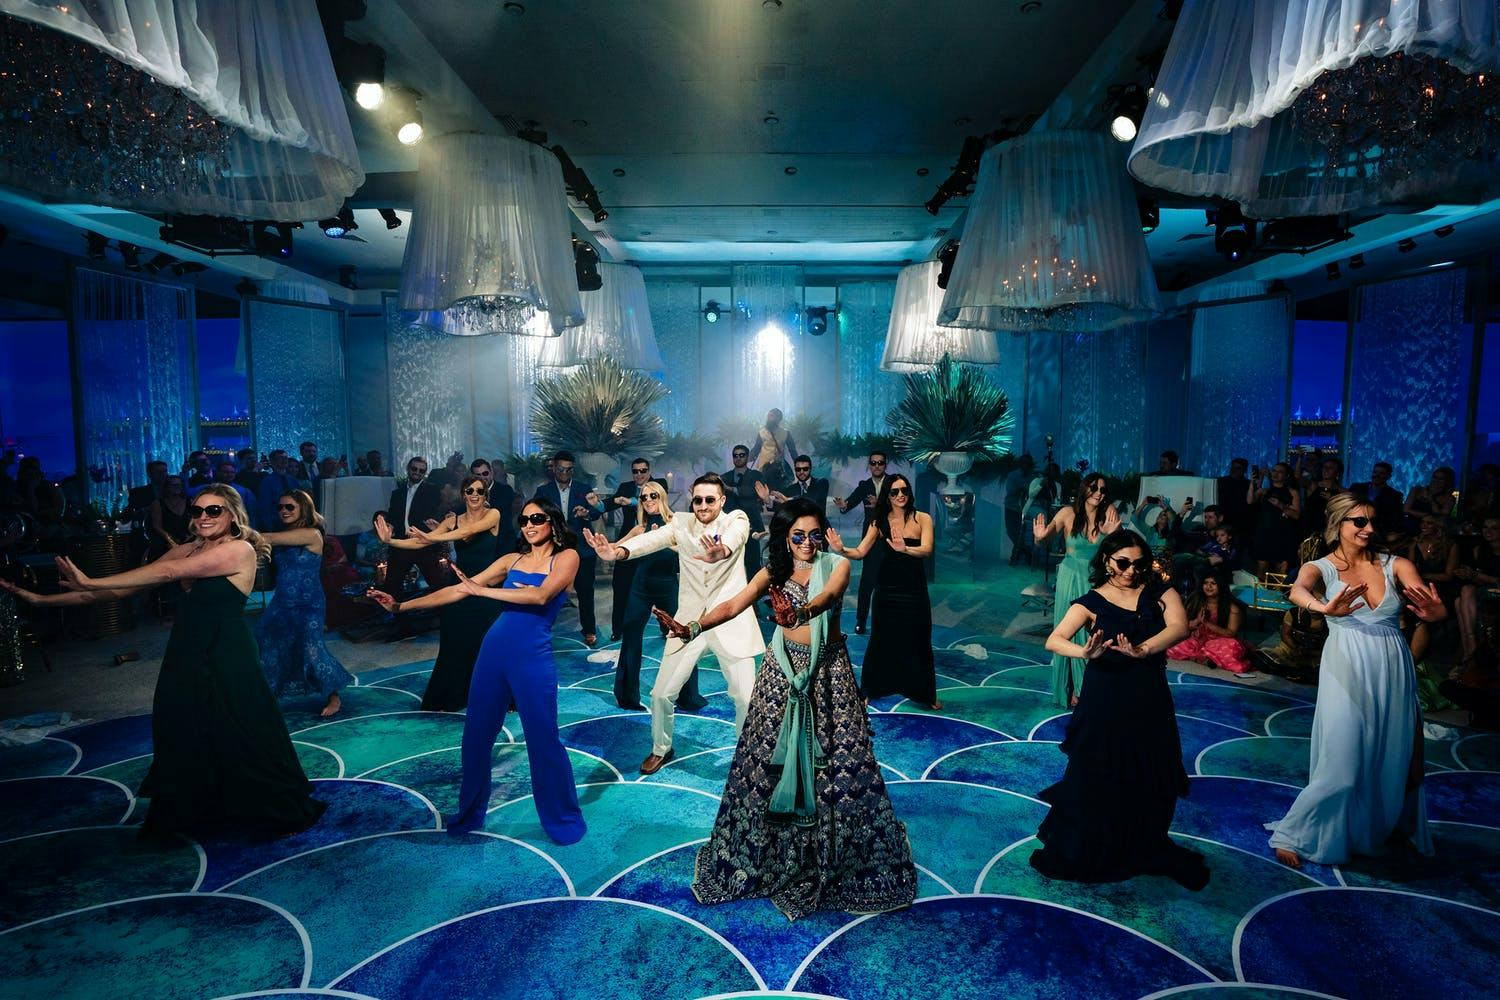 South Asian choreographed dance on blue and green ocean-like dance floor with vibrant blue uplighting | PartySlate